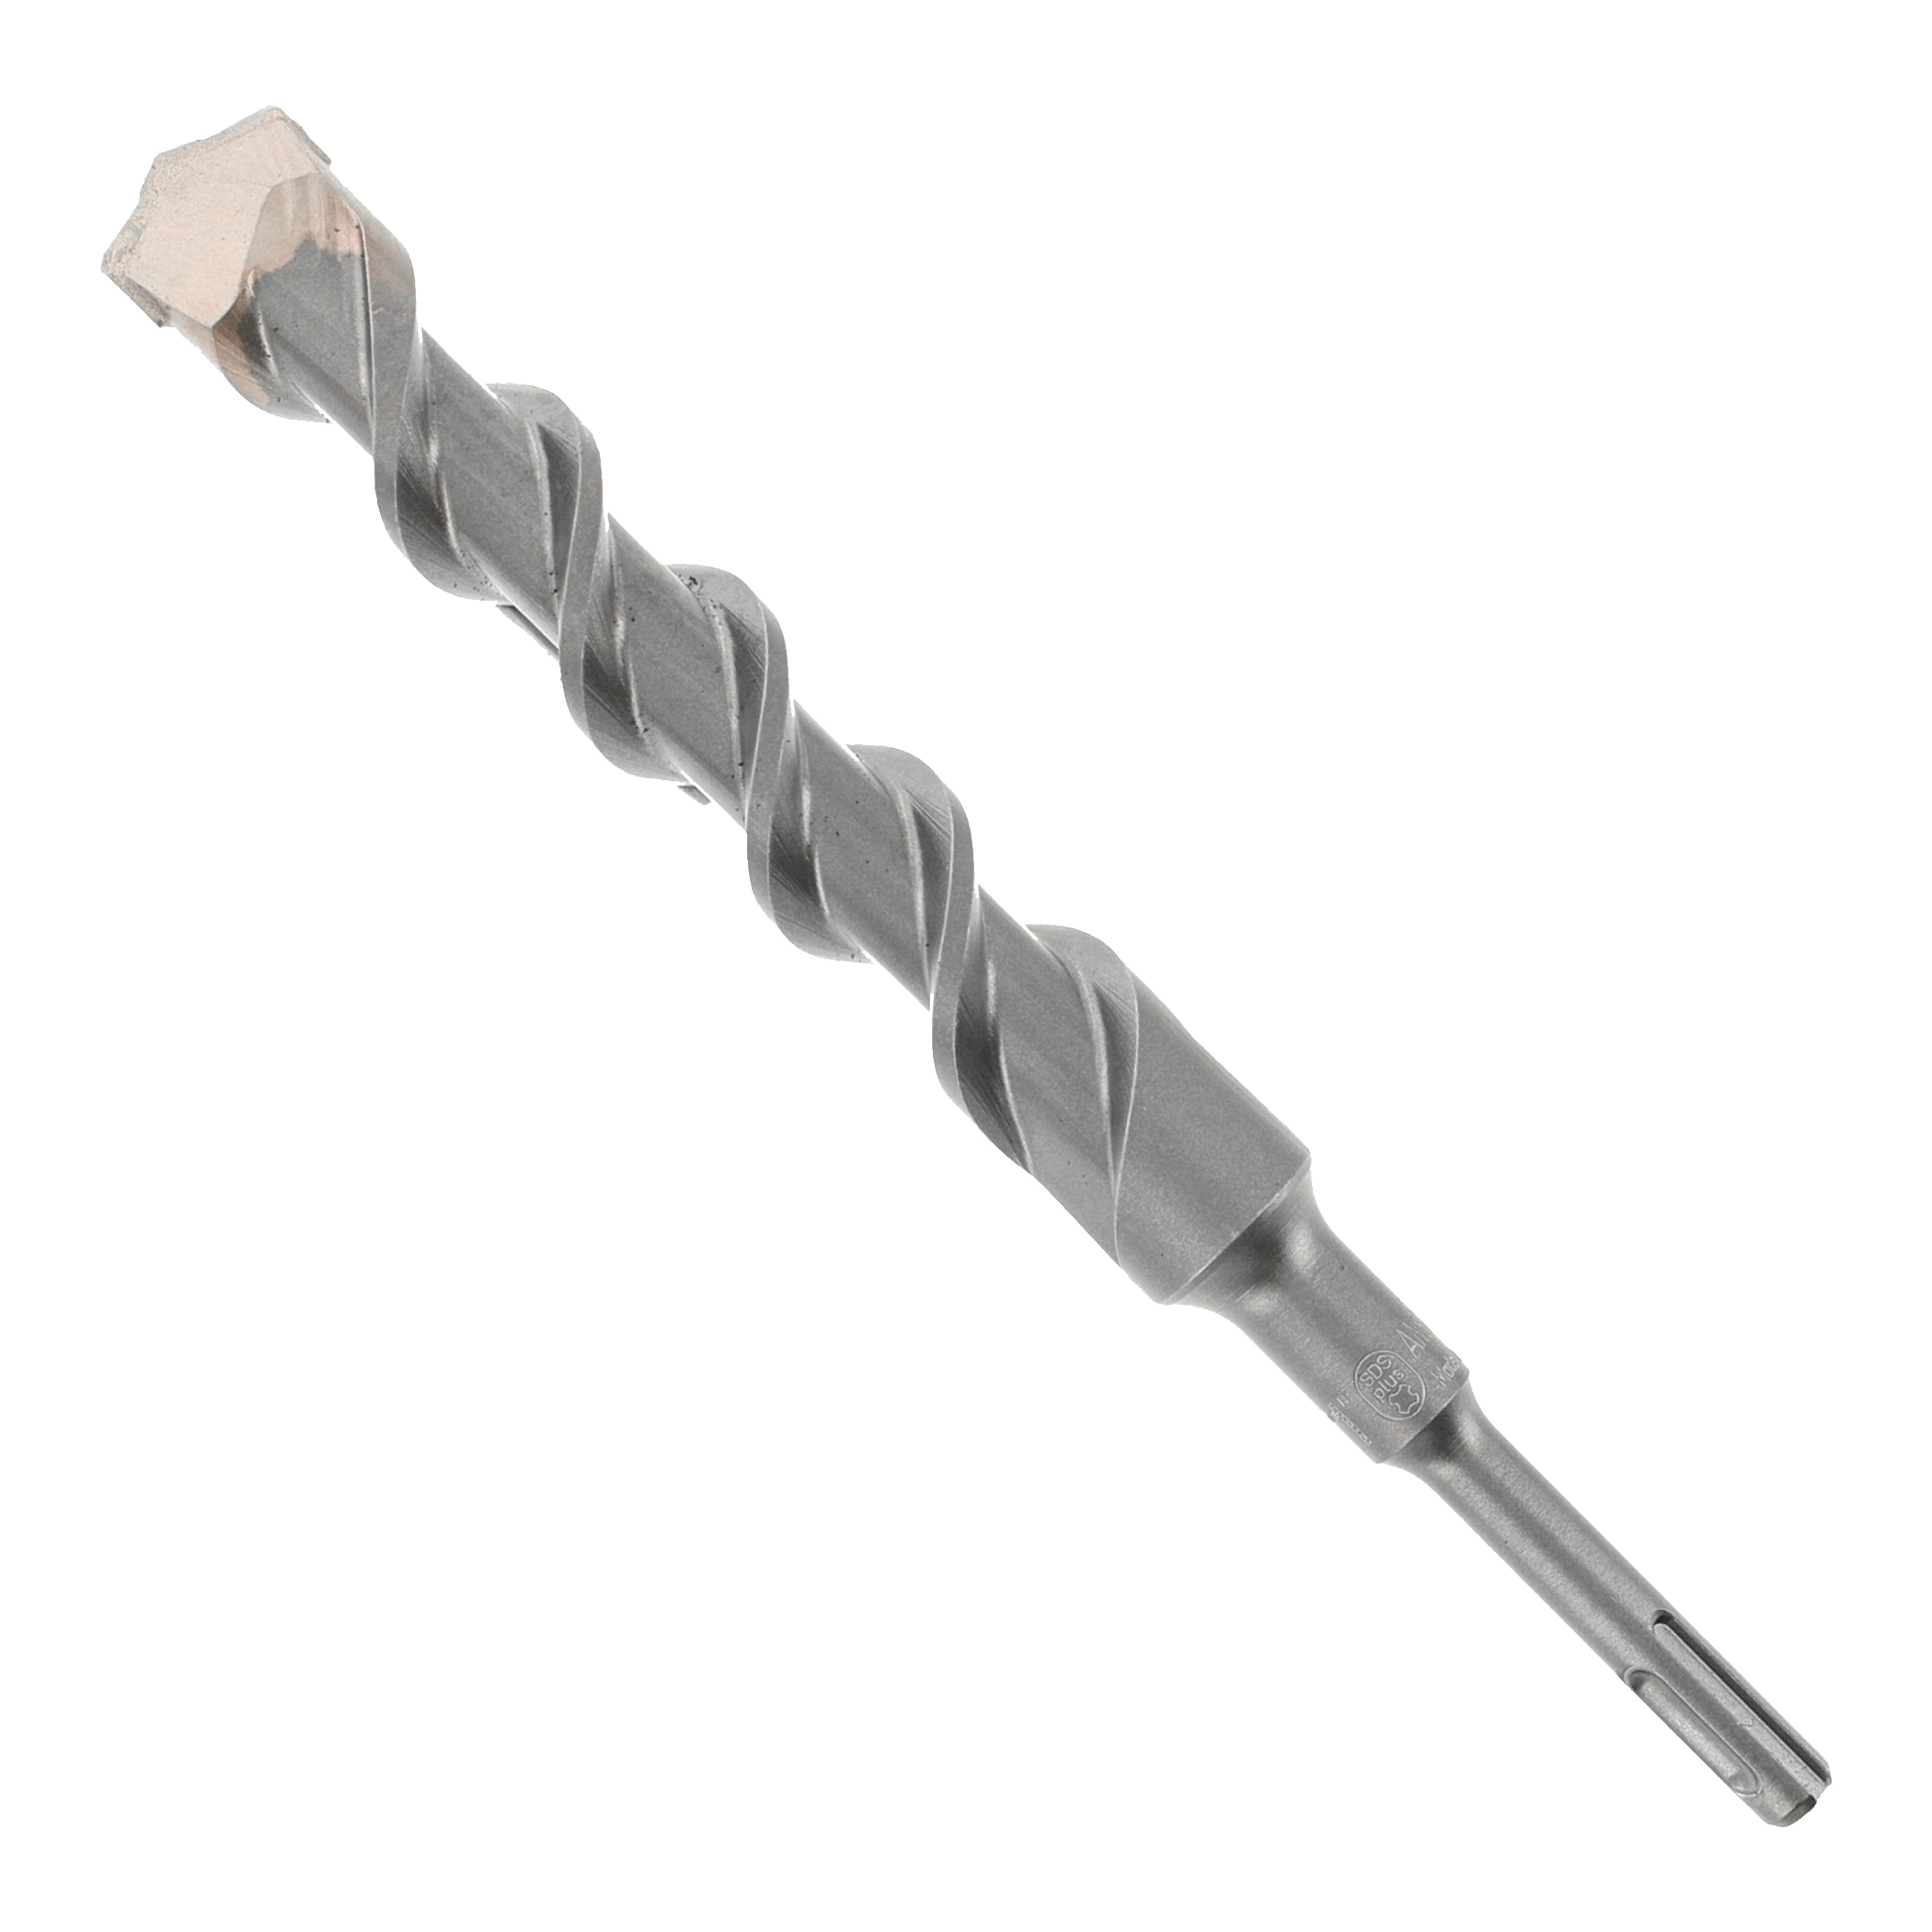 DMAPL2520 Hammer Drill Bit, 1 in Dia, 10 in OAL, Percussion, 4-Flute, SDS Plus Shank